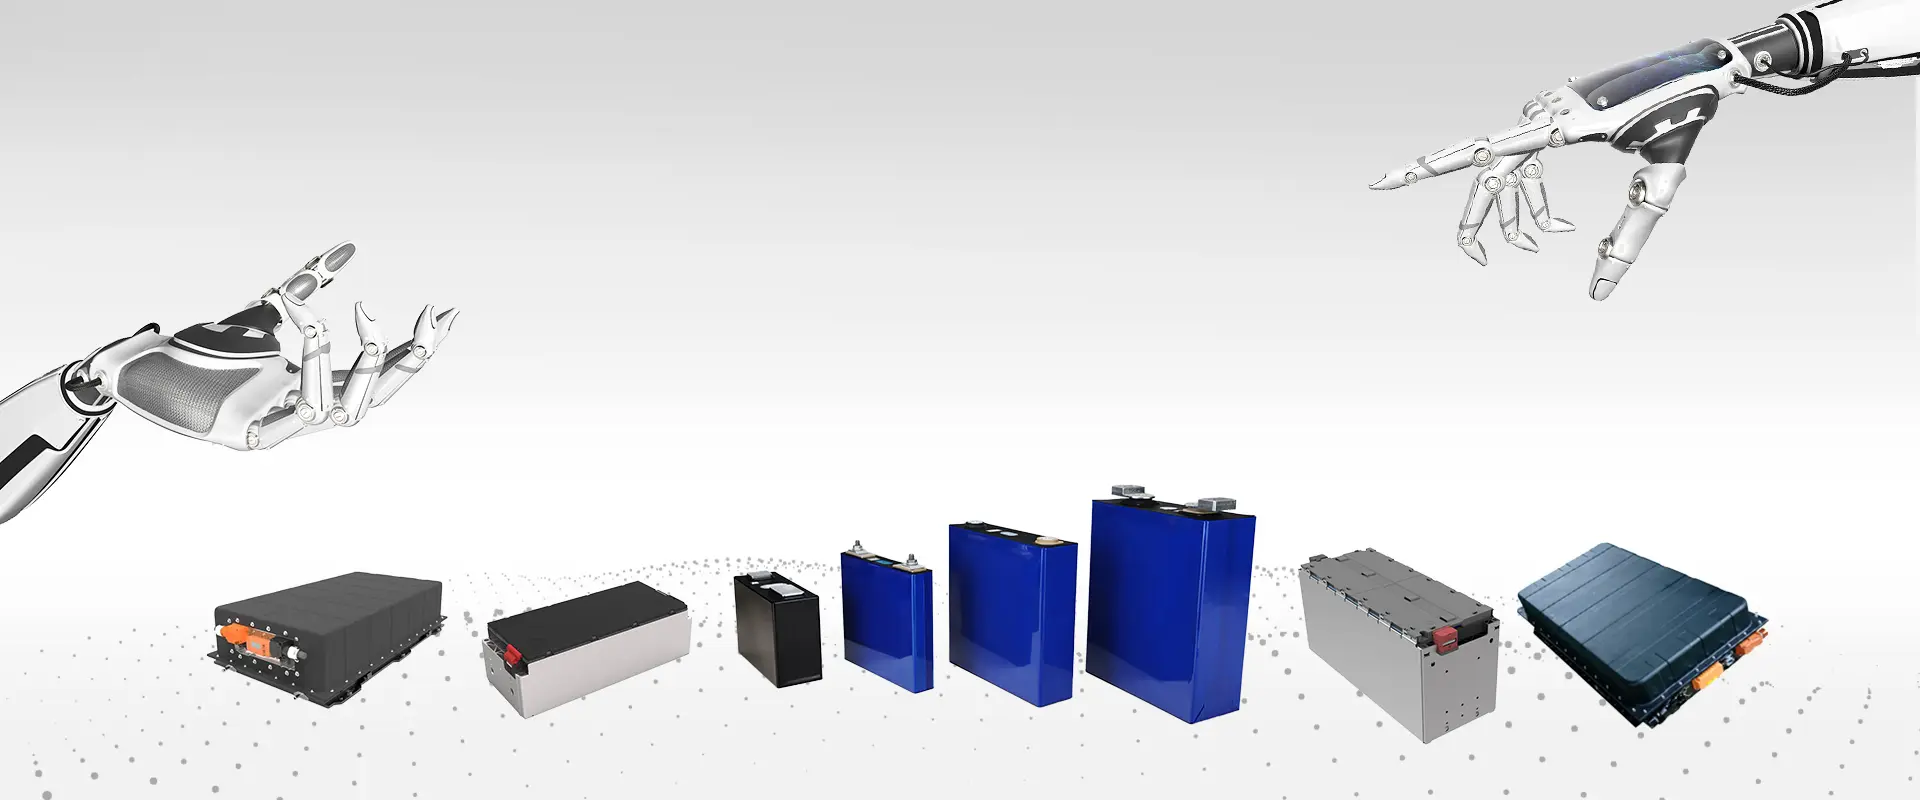 Lithium Ion Battery Products of Eco Power